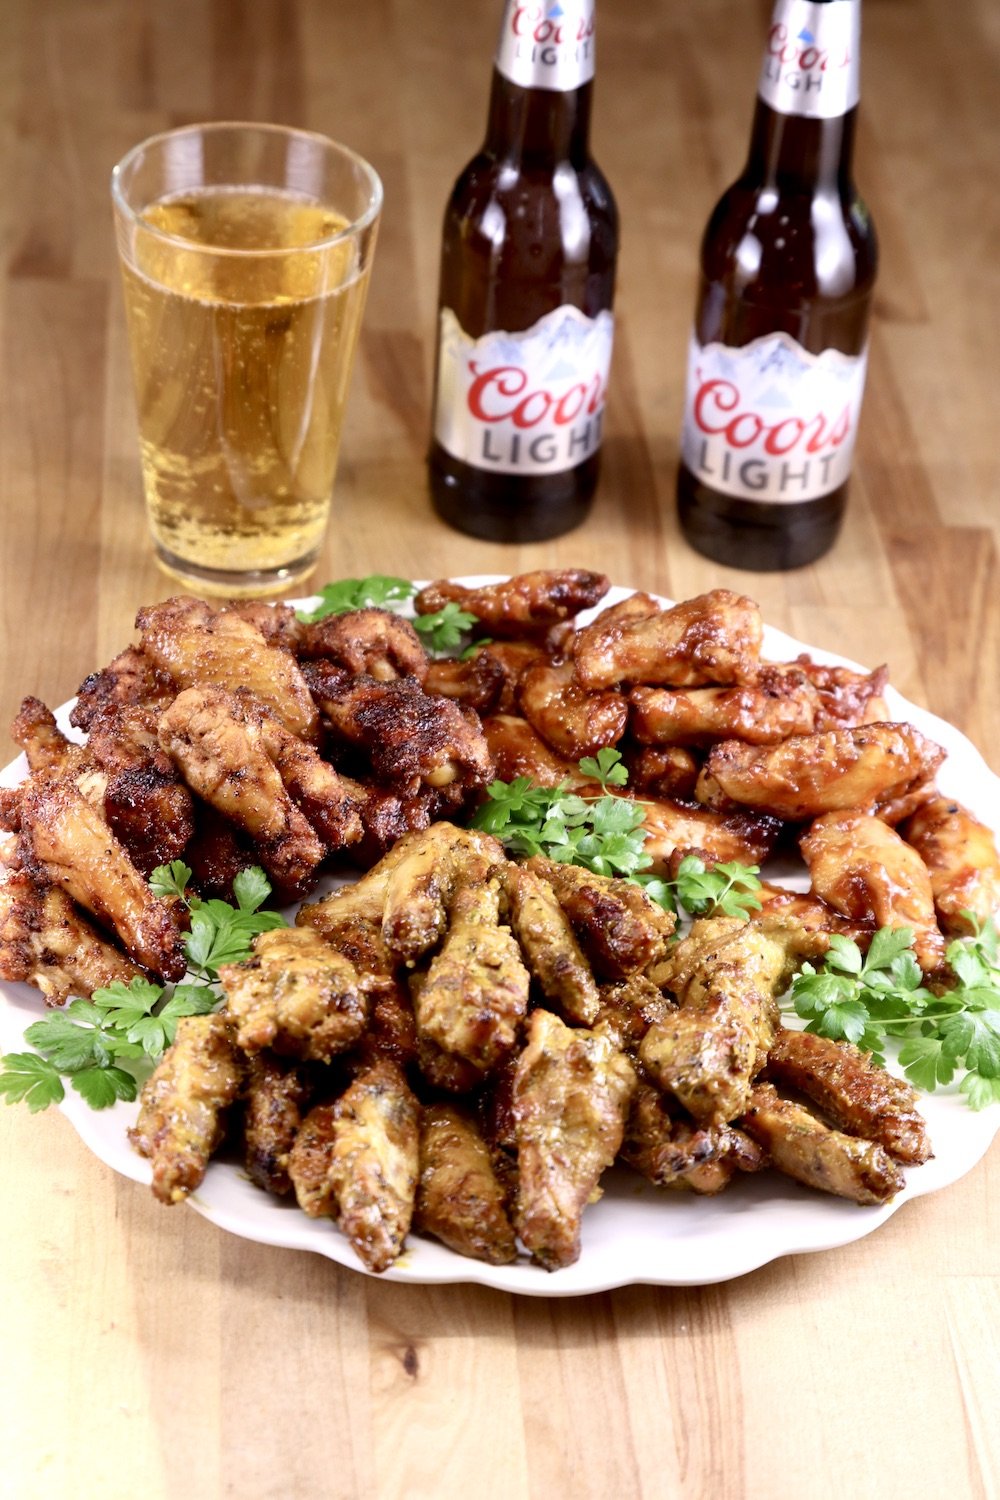 Platter of chicken wings with Coors Beer in a glass and 2 bottles